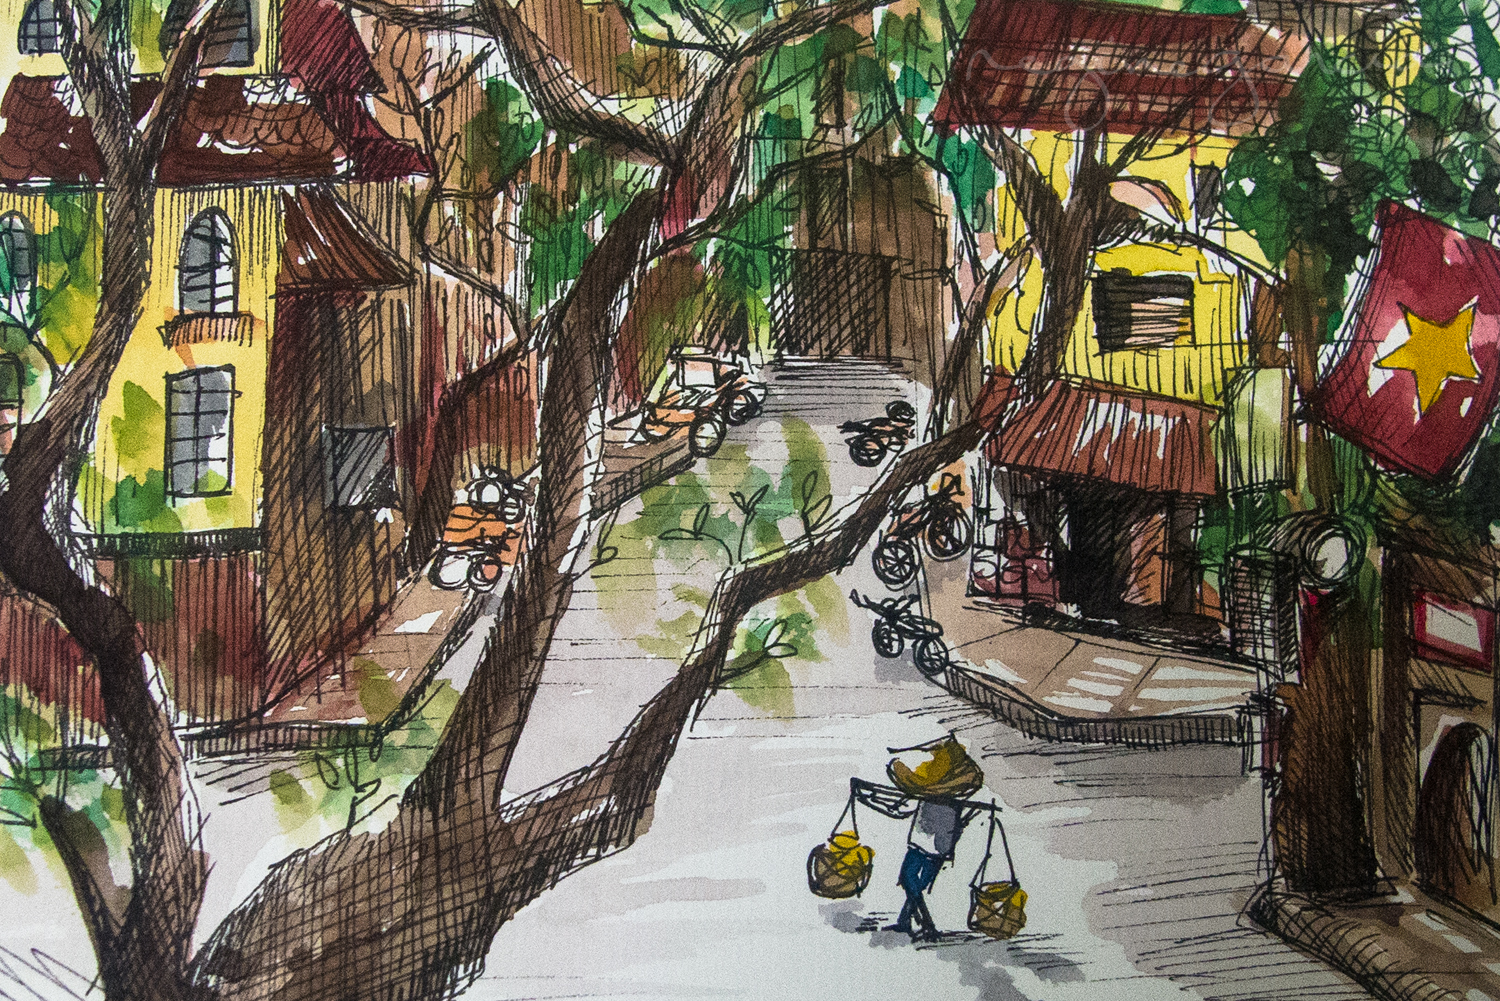 Watercolor and Ink rendering from Hanoi Old Quarter rapid sketching.